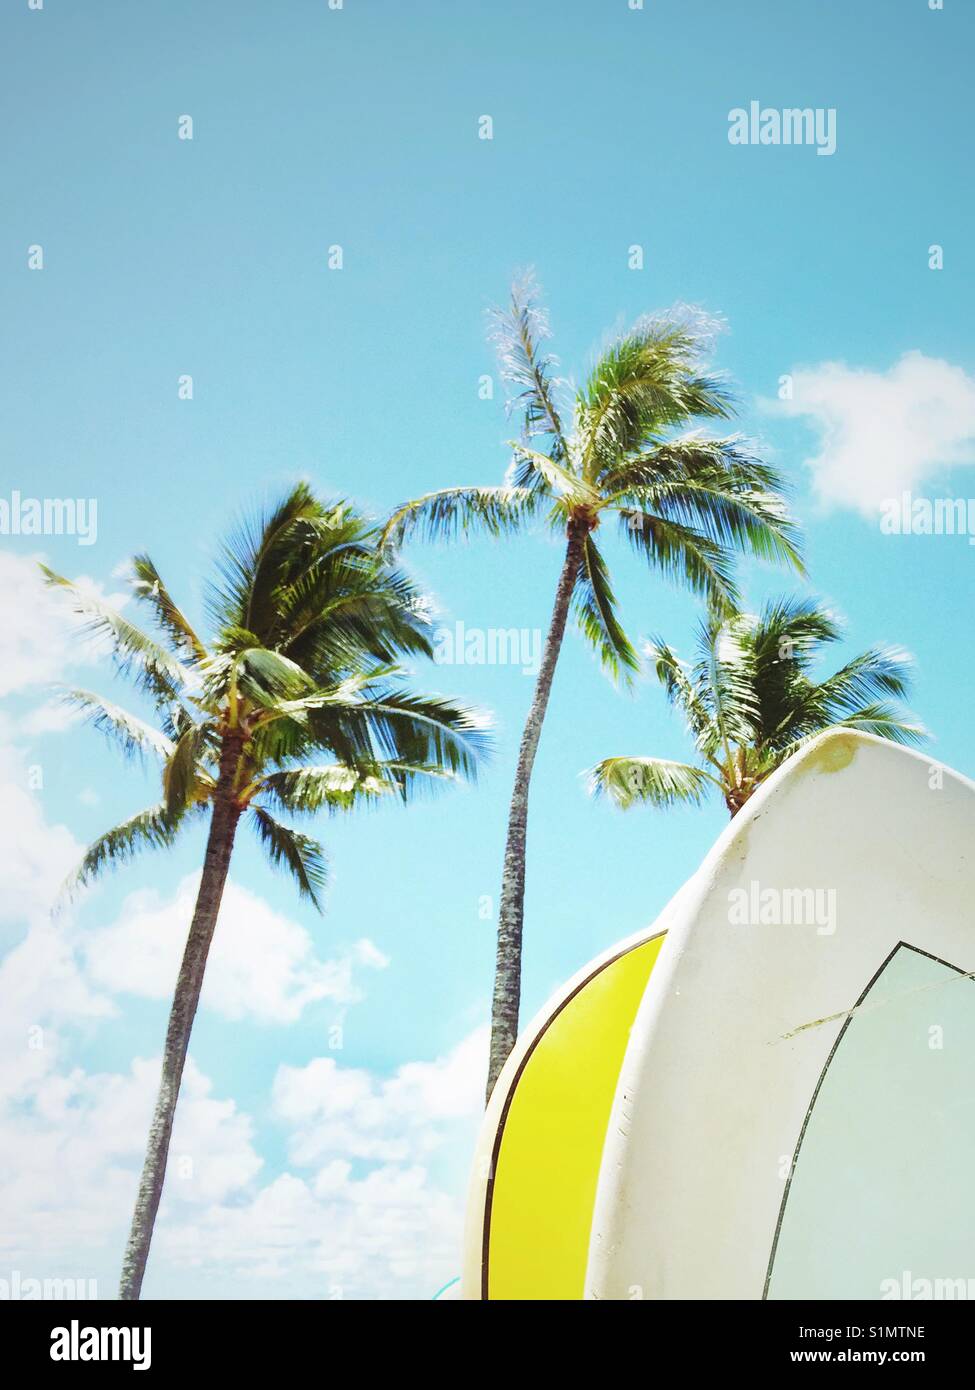 Top of two surfboards with palm trees and blue sky in background. Stock Photo